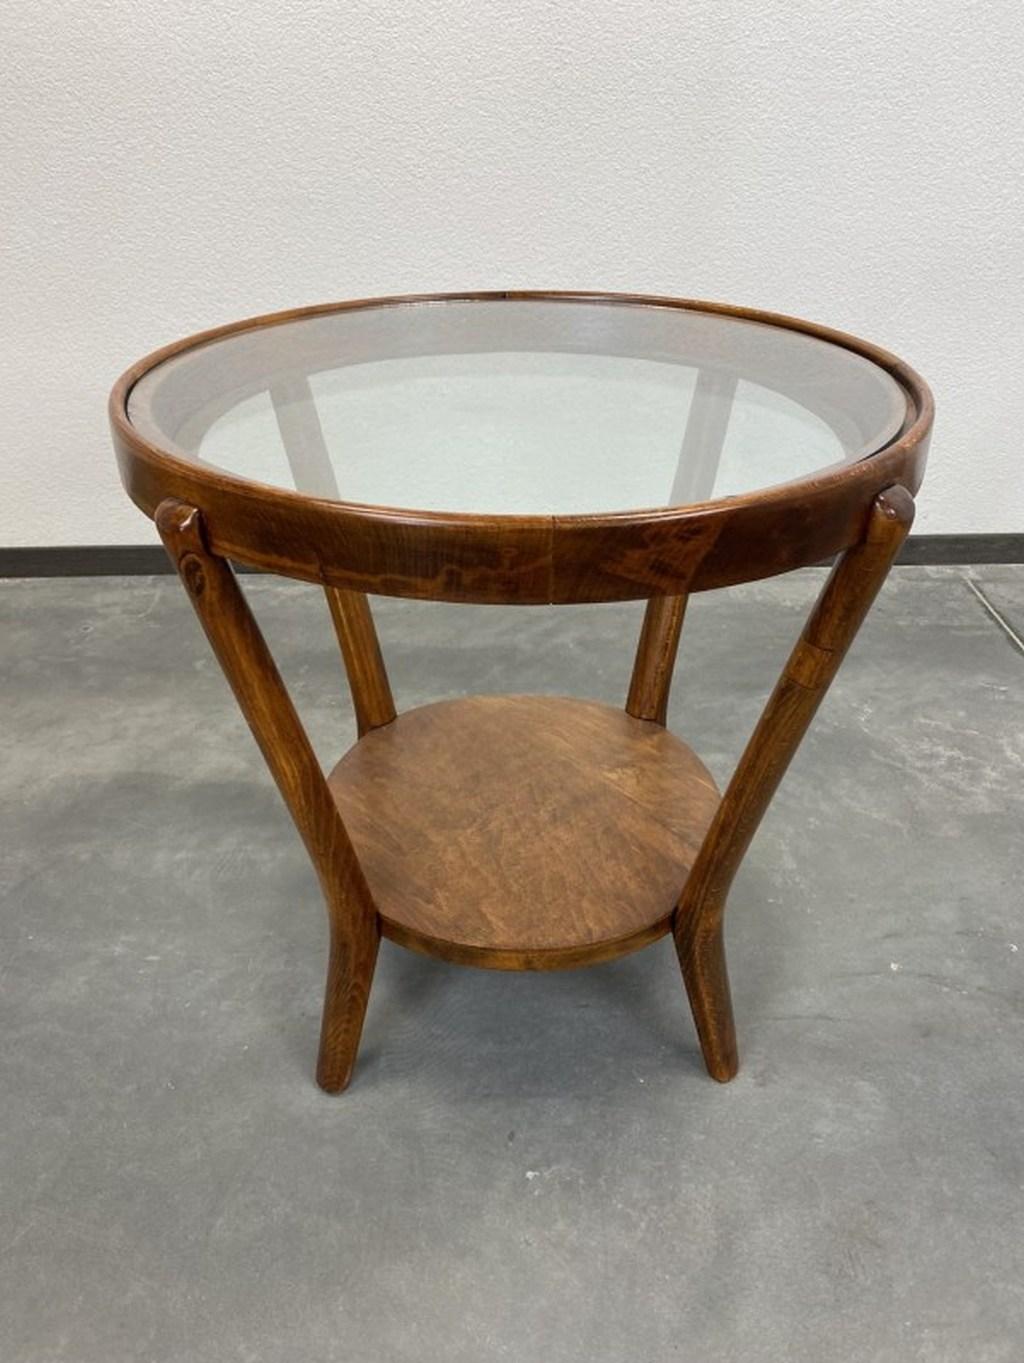 Coffee table designed by Karel Koželka and Antonín Kropácek for International Triennial in Milan in 1946, higher model with double glass top. Wooden parts were repolished, original glass with signs of age and usage.